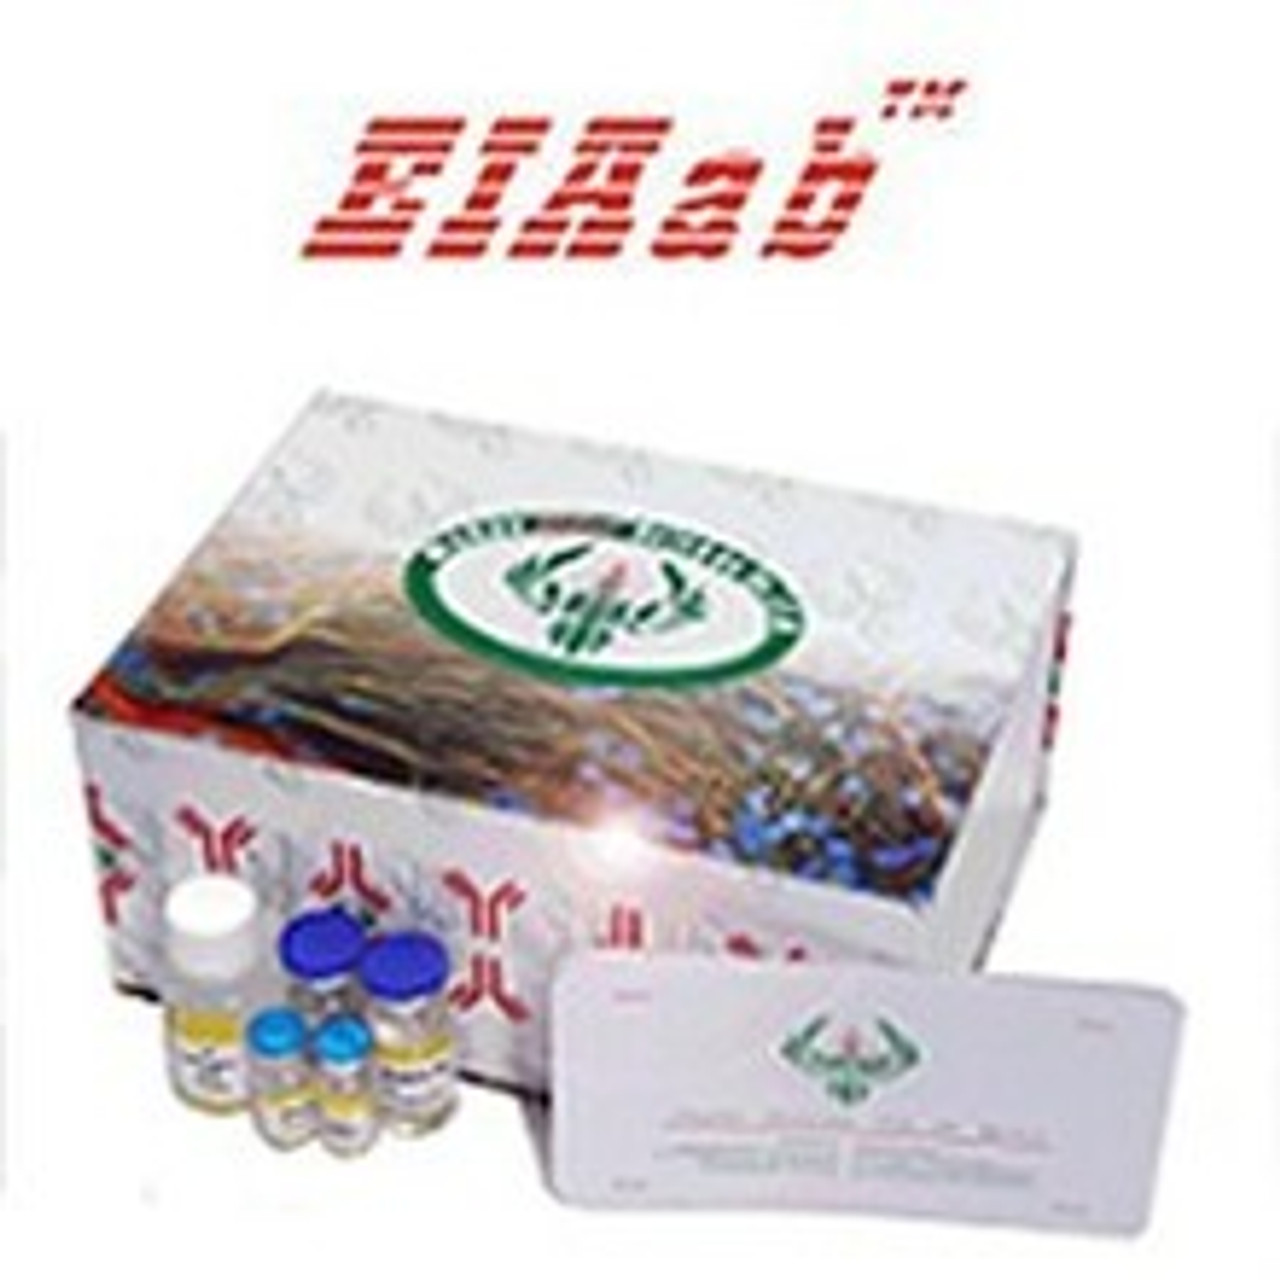 Mouse Wnt7a/Protein Wnt-7a ELISA Kit